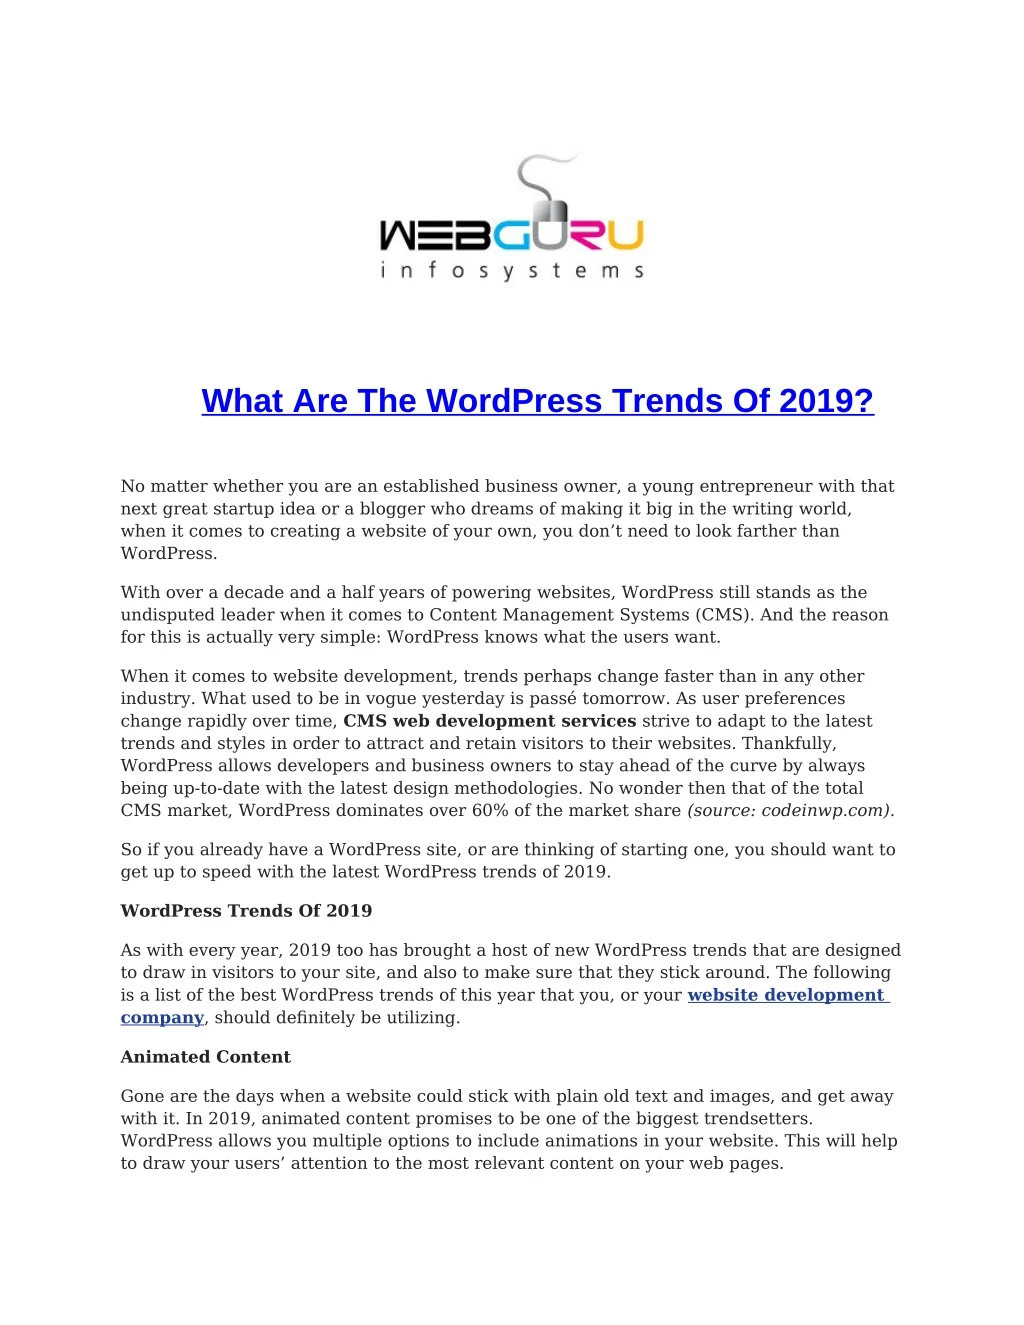 what are the wordpress trends of 2019